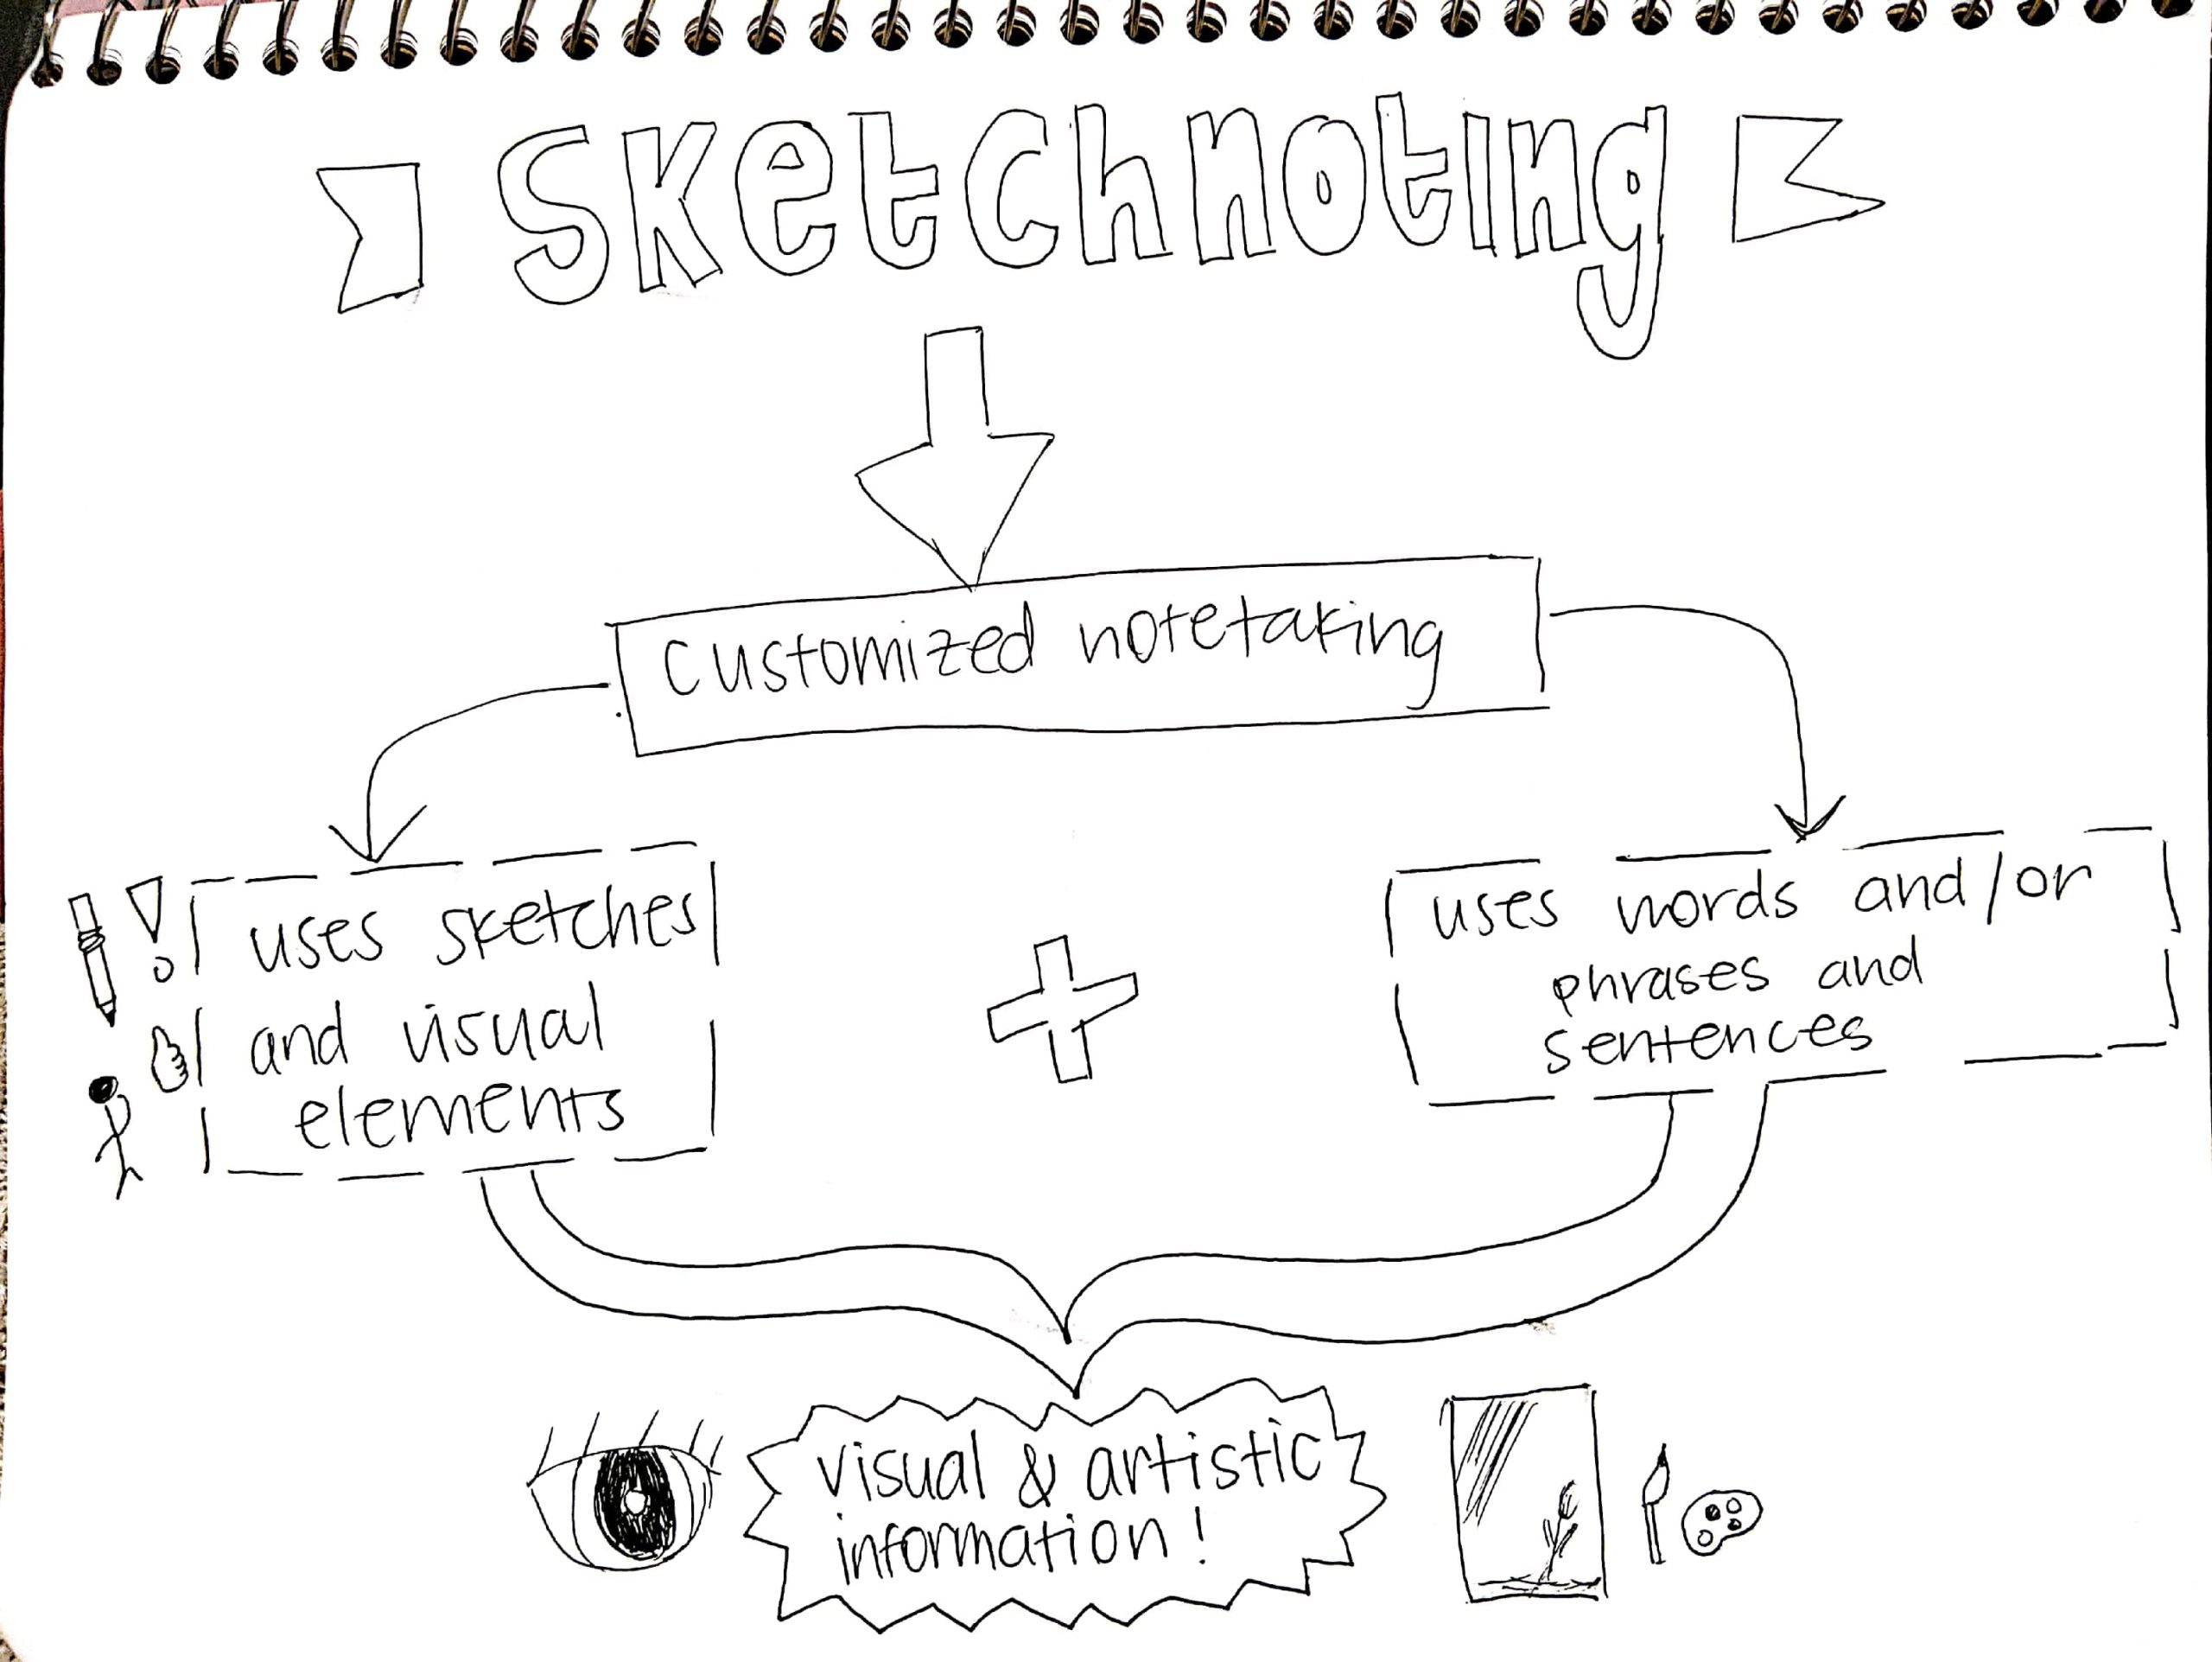 Sketchnoting is customized notetaking using sketches and visual elements, plus words and or phrases and sentences to convey visual and artistic information